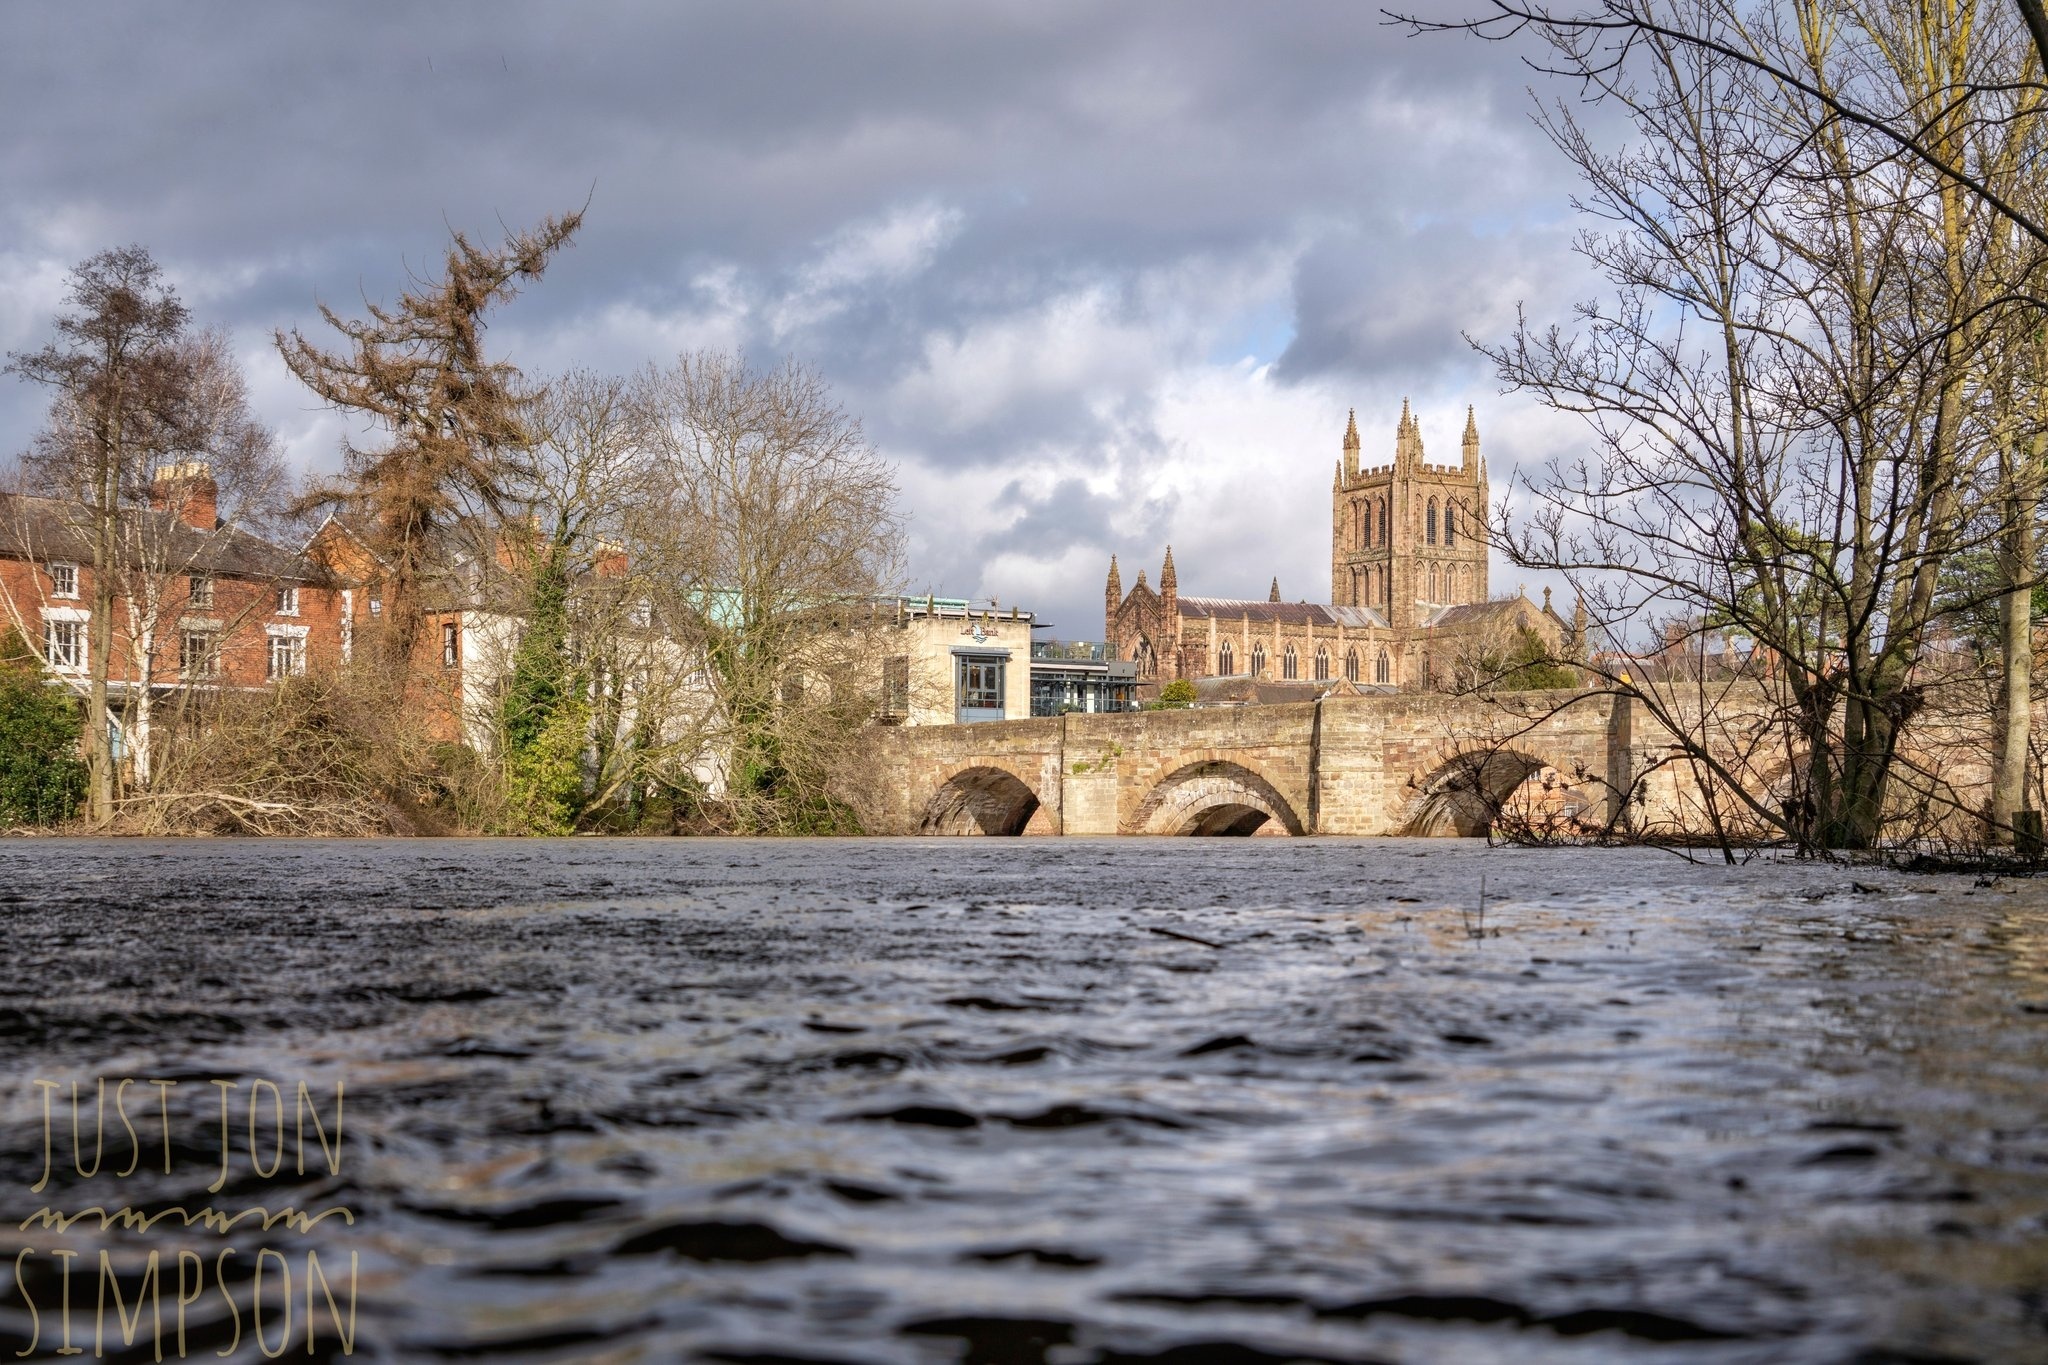 River Wye with Herefordshire Cathedral in the background.